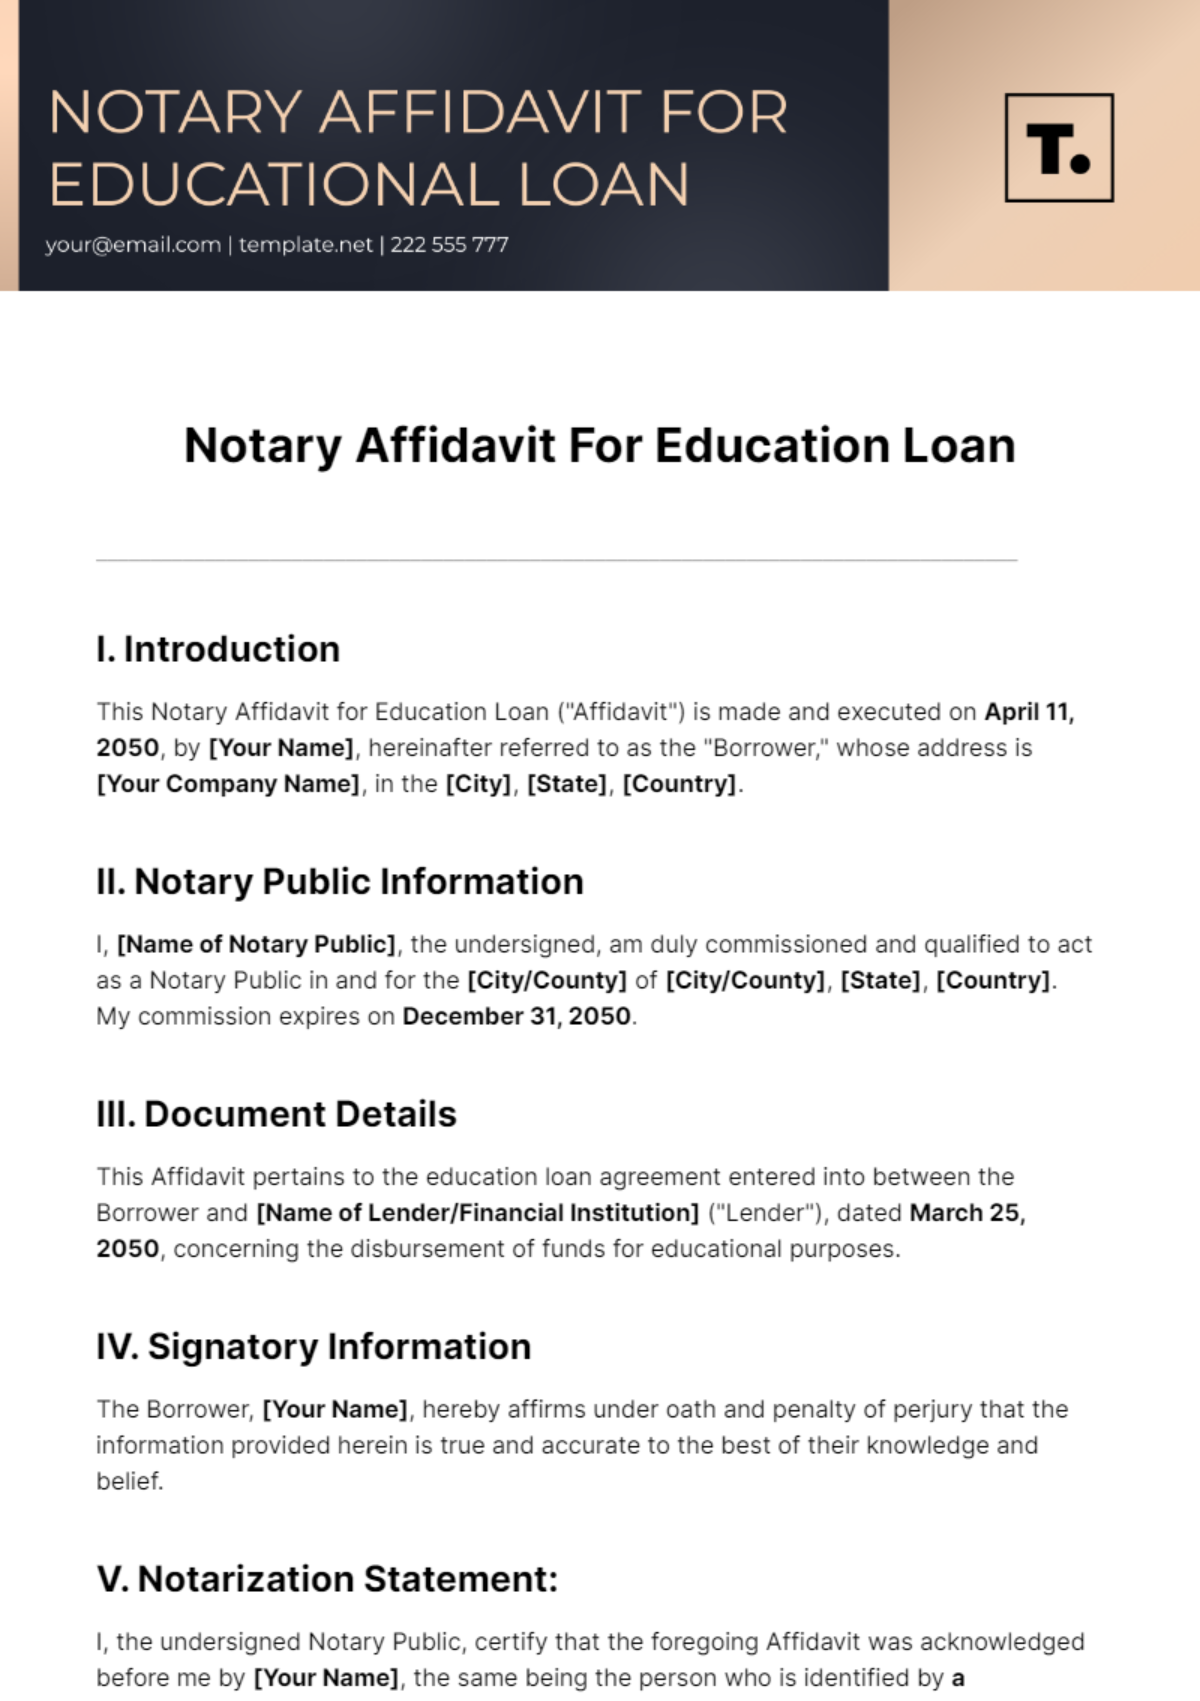 Free Notary Affidavit For Education Loan Template